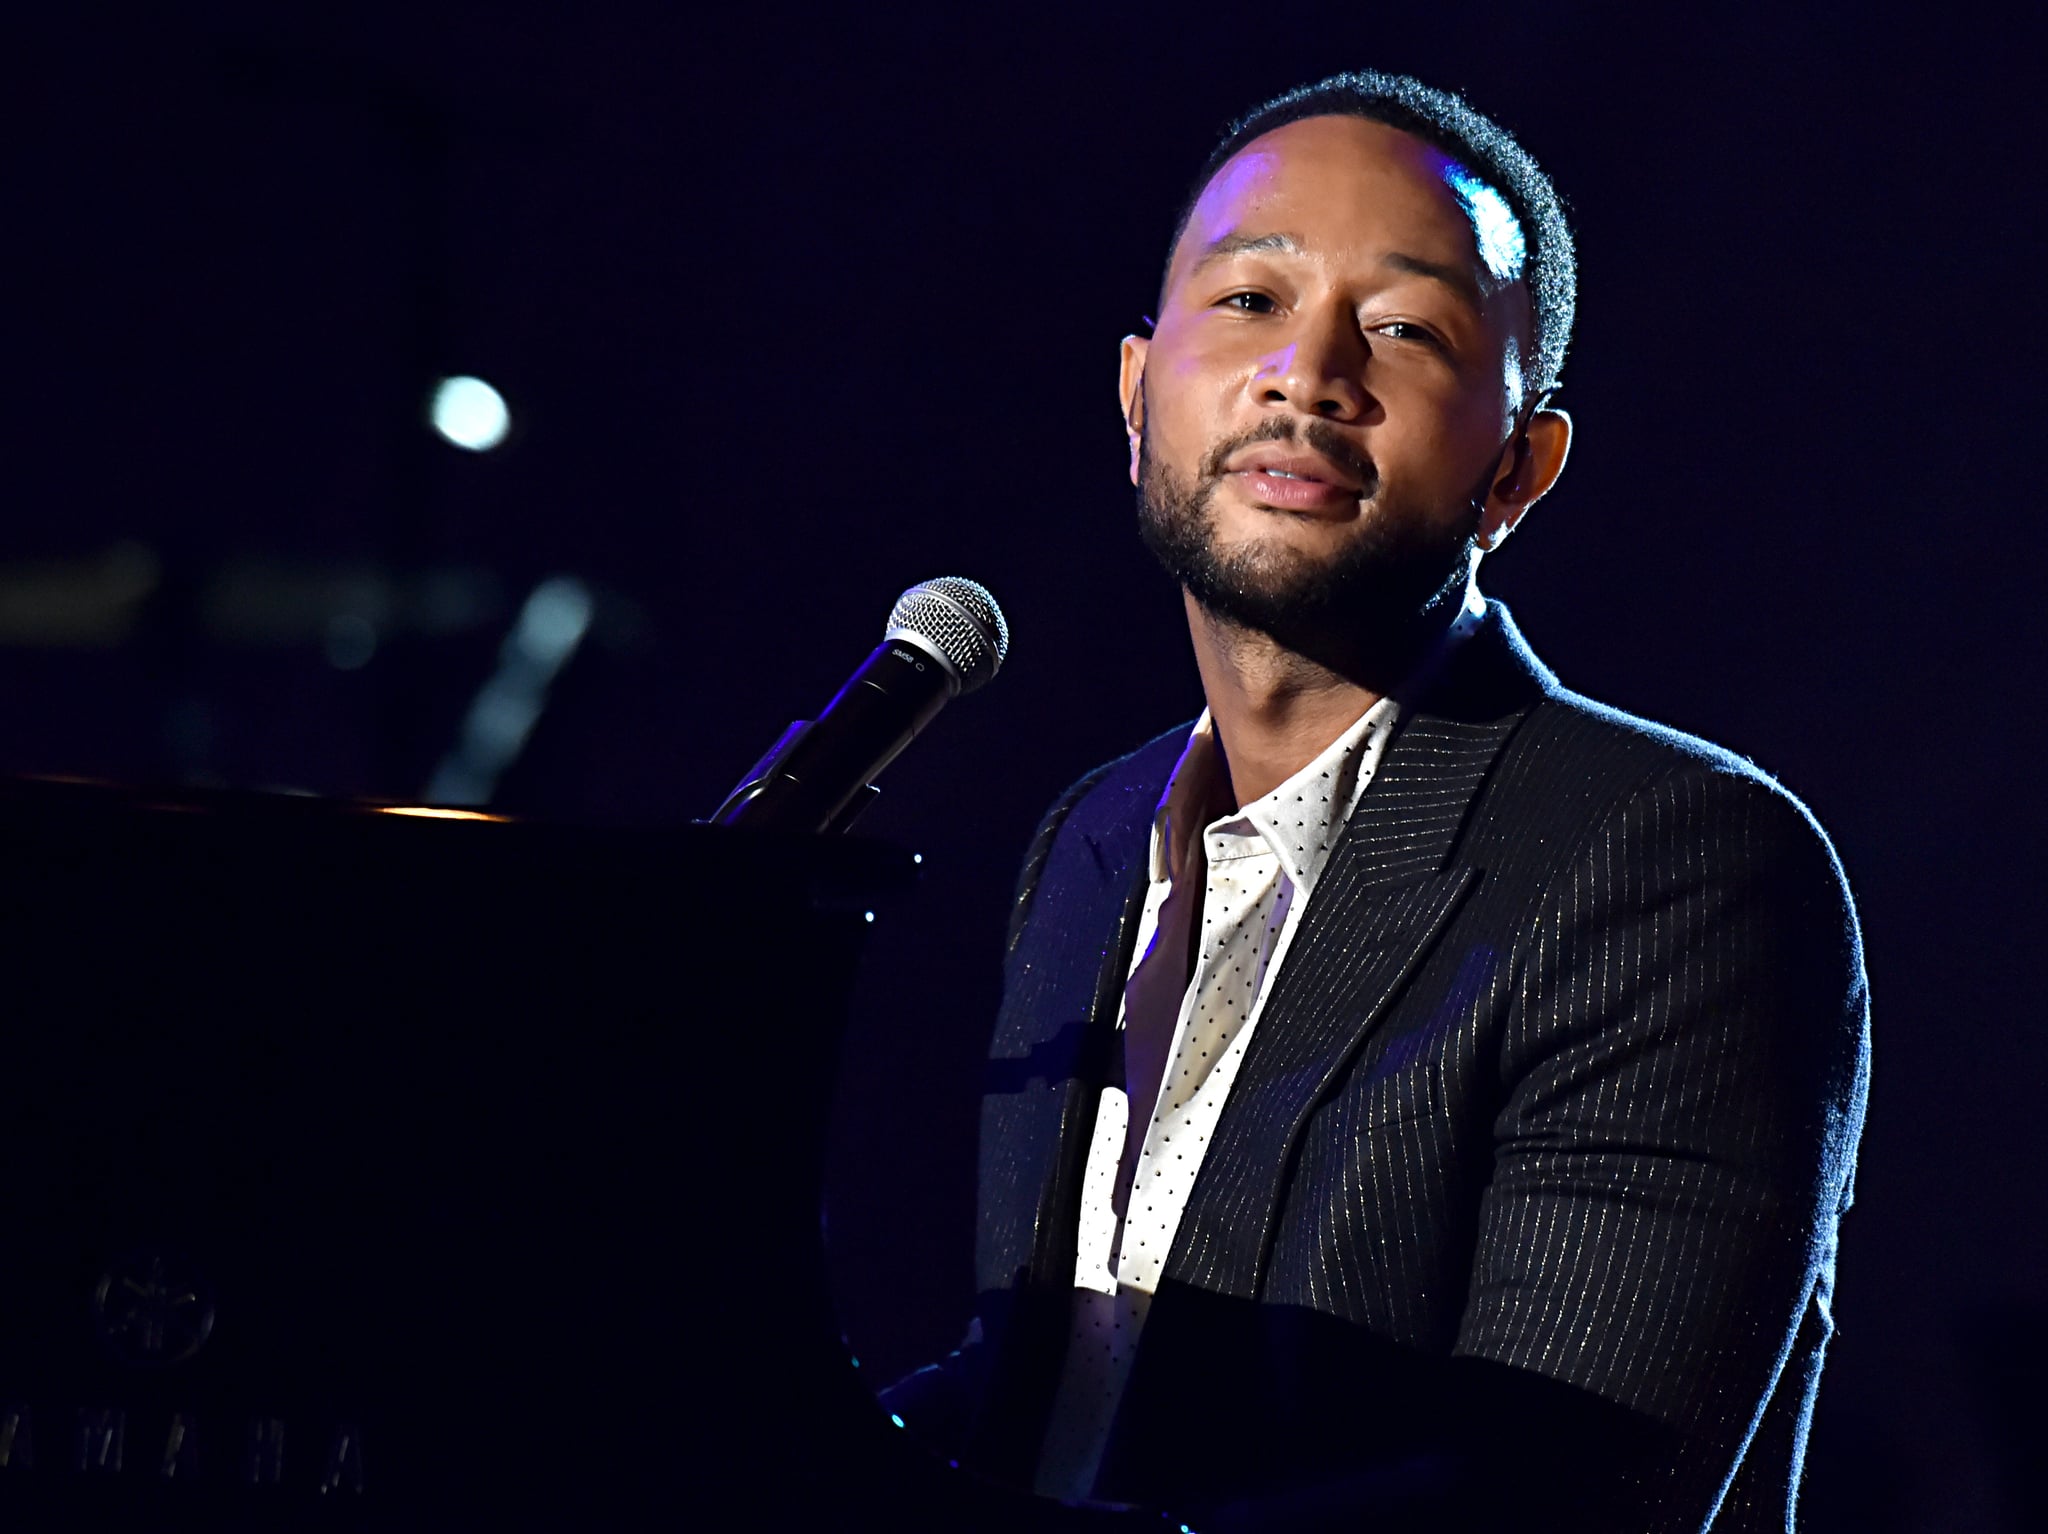 LOS ANGELES, CALIFORNIA - JANUARY 24: John Legend performs onstage during MusiCares Person of the Year honoring Aerosmith at West Hall at Los Angeles Convention Center on January 24, 2020 in Los Angeles, California. (Photo by Lester Cohen/Getty Images for The Recording Academy )